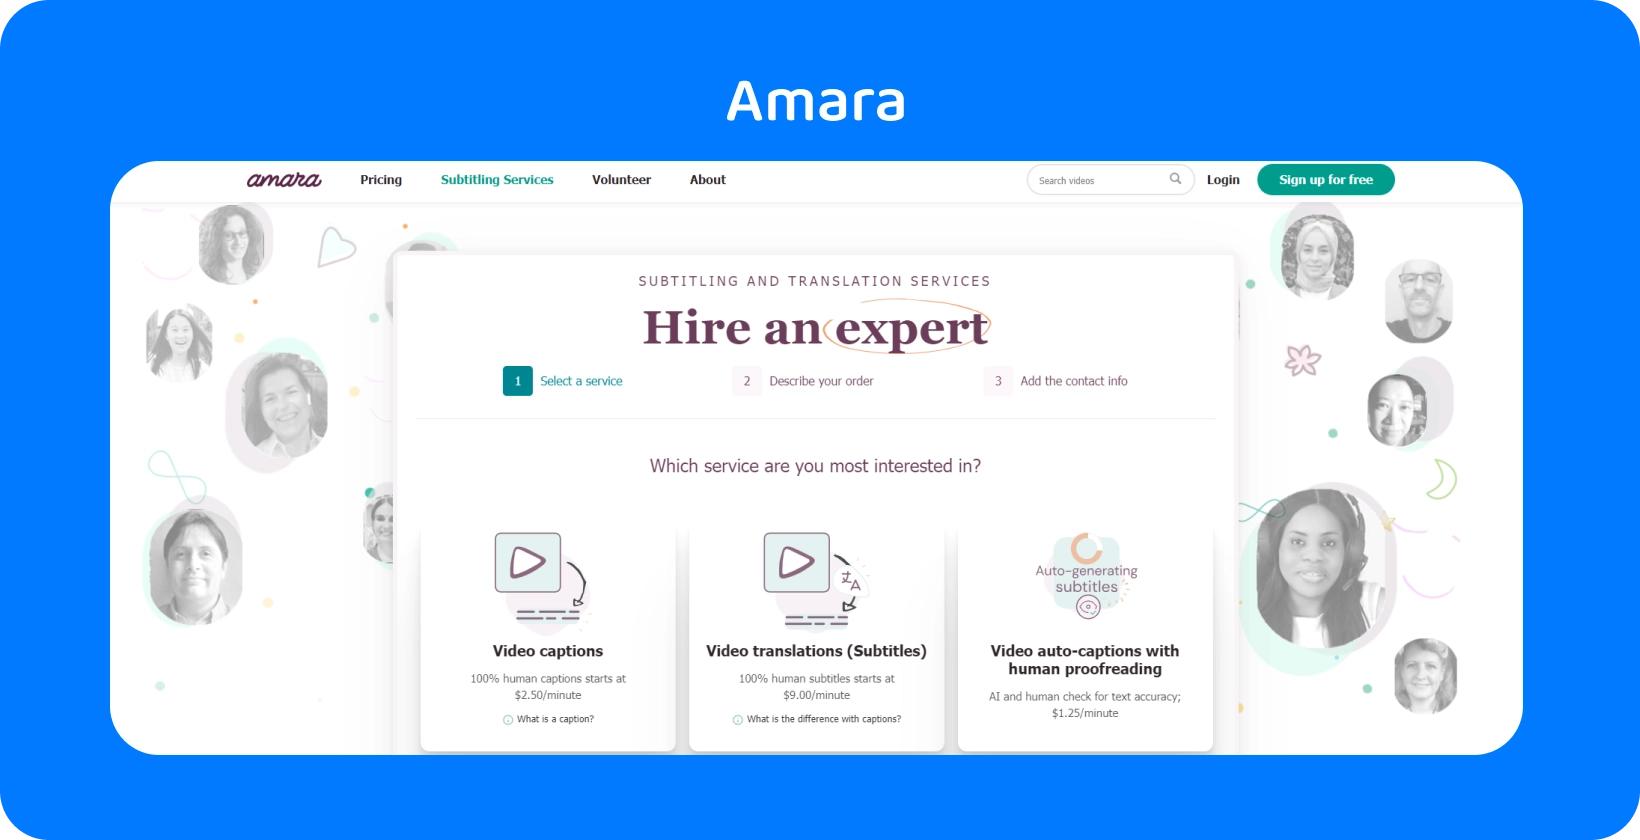 Amara's webpage showing how to easily add subtitles to videos online, enhancing viewer accessibility.